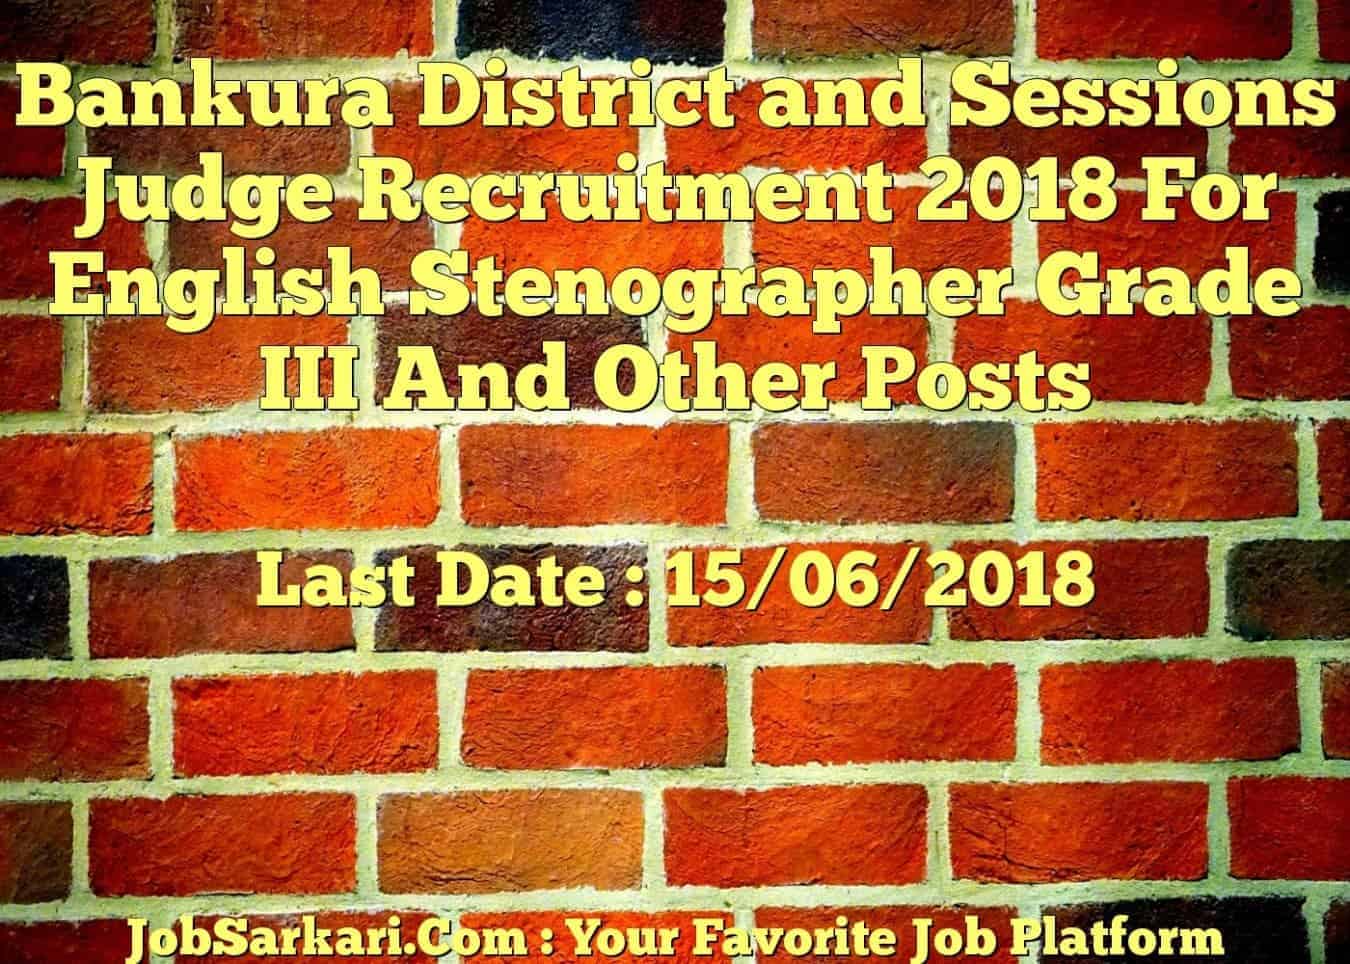 Bankura District and Sessions Judge Recruitment 2018 For English Stenographer Grade III And Other Posts